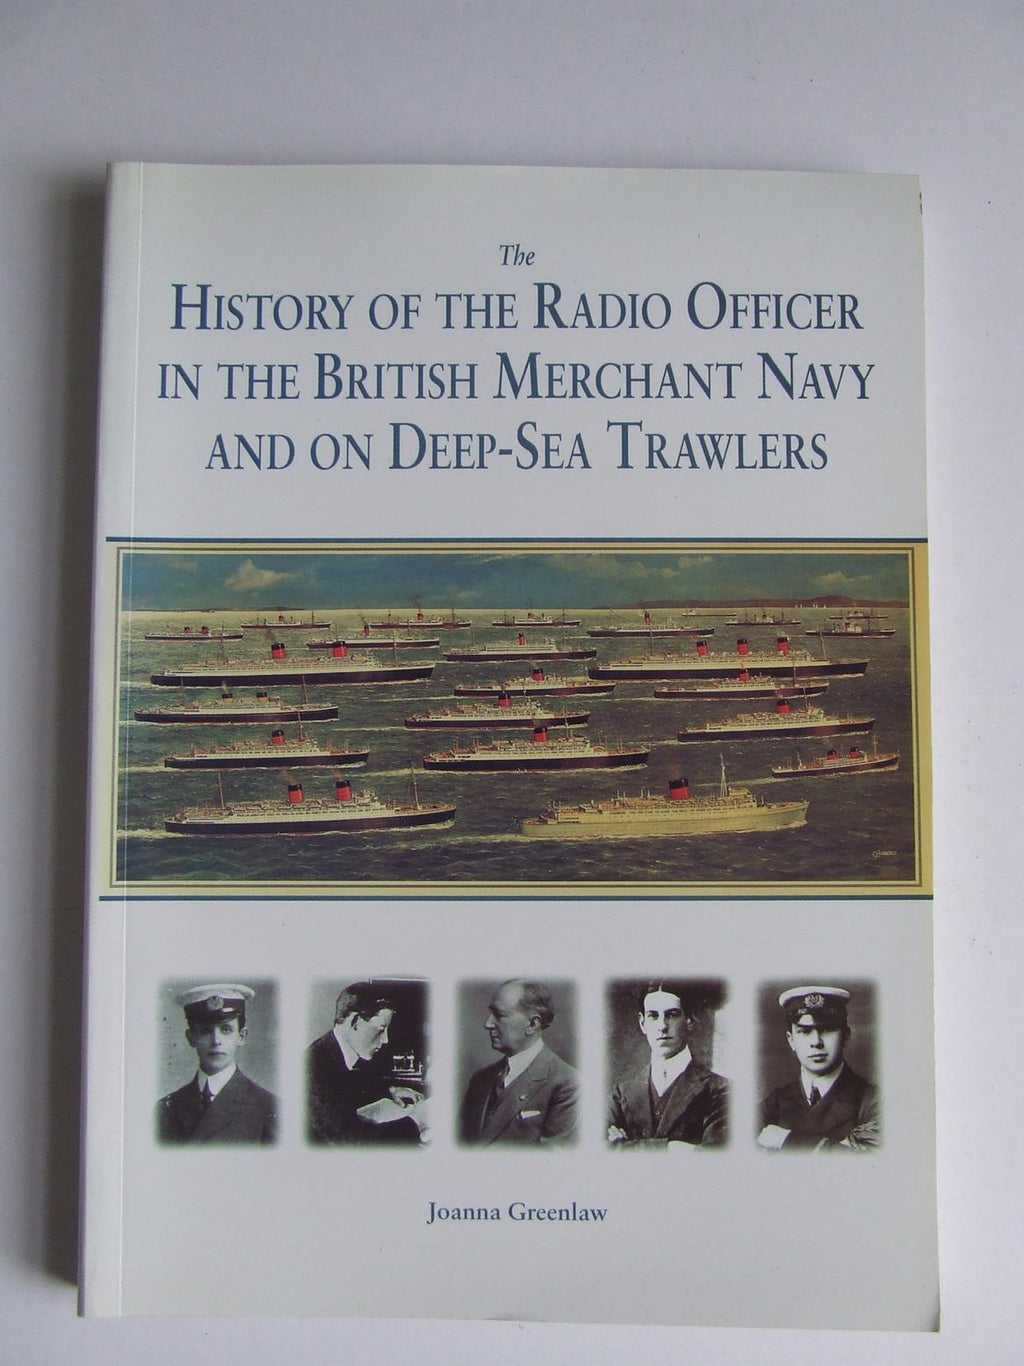 The History of the Radio Officer in the British Merchant Navy and on Deep-Sea Trawler